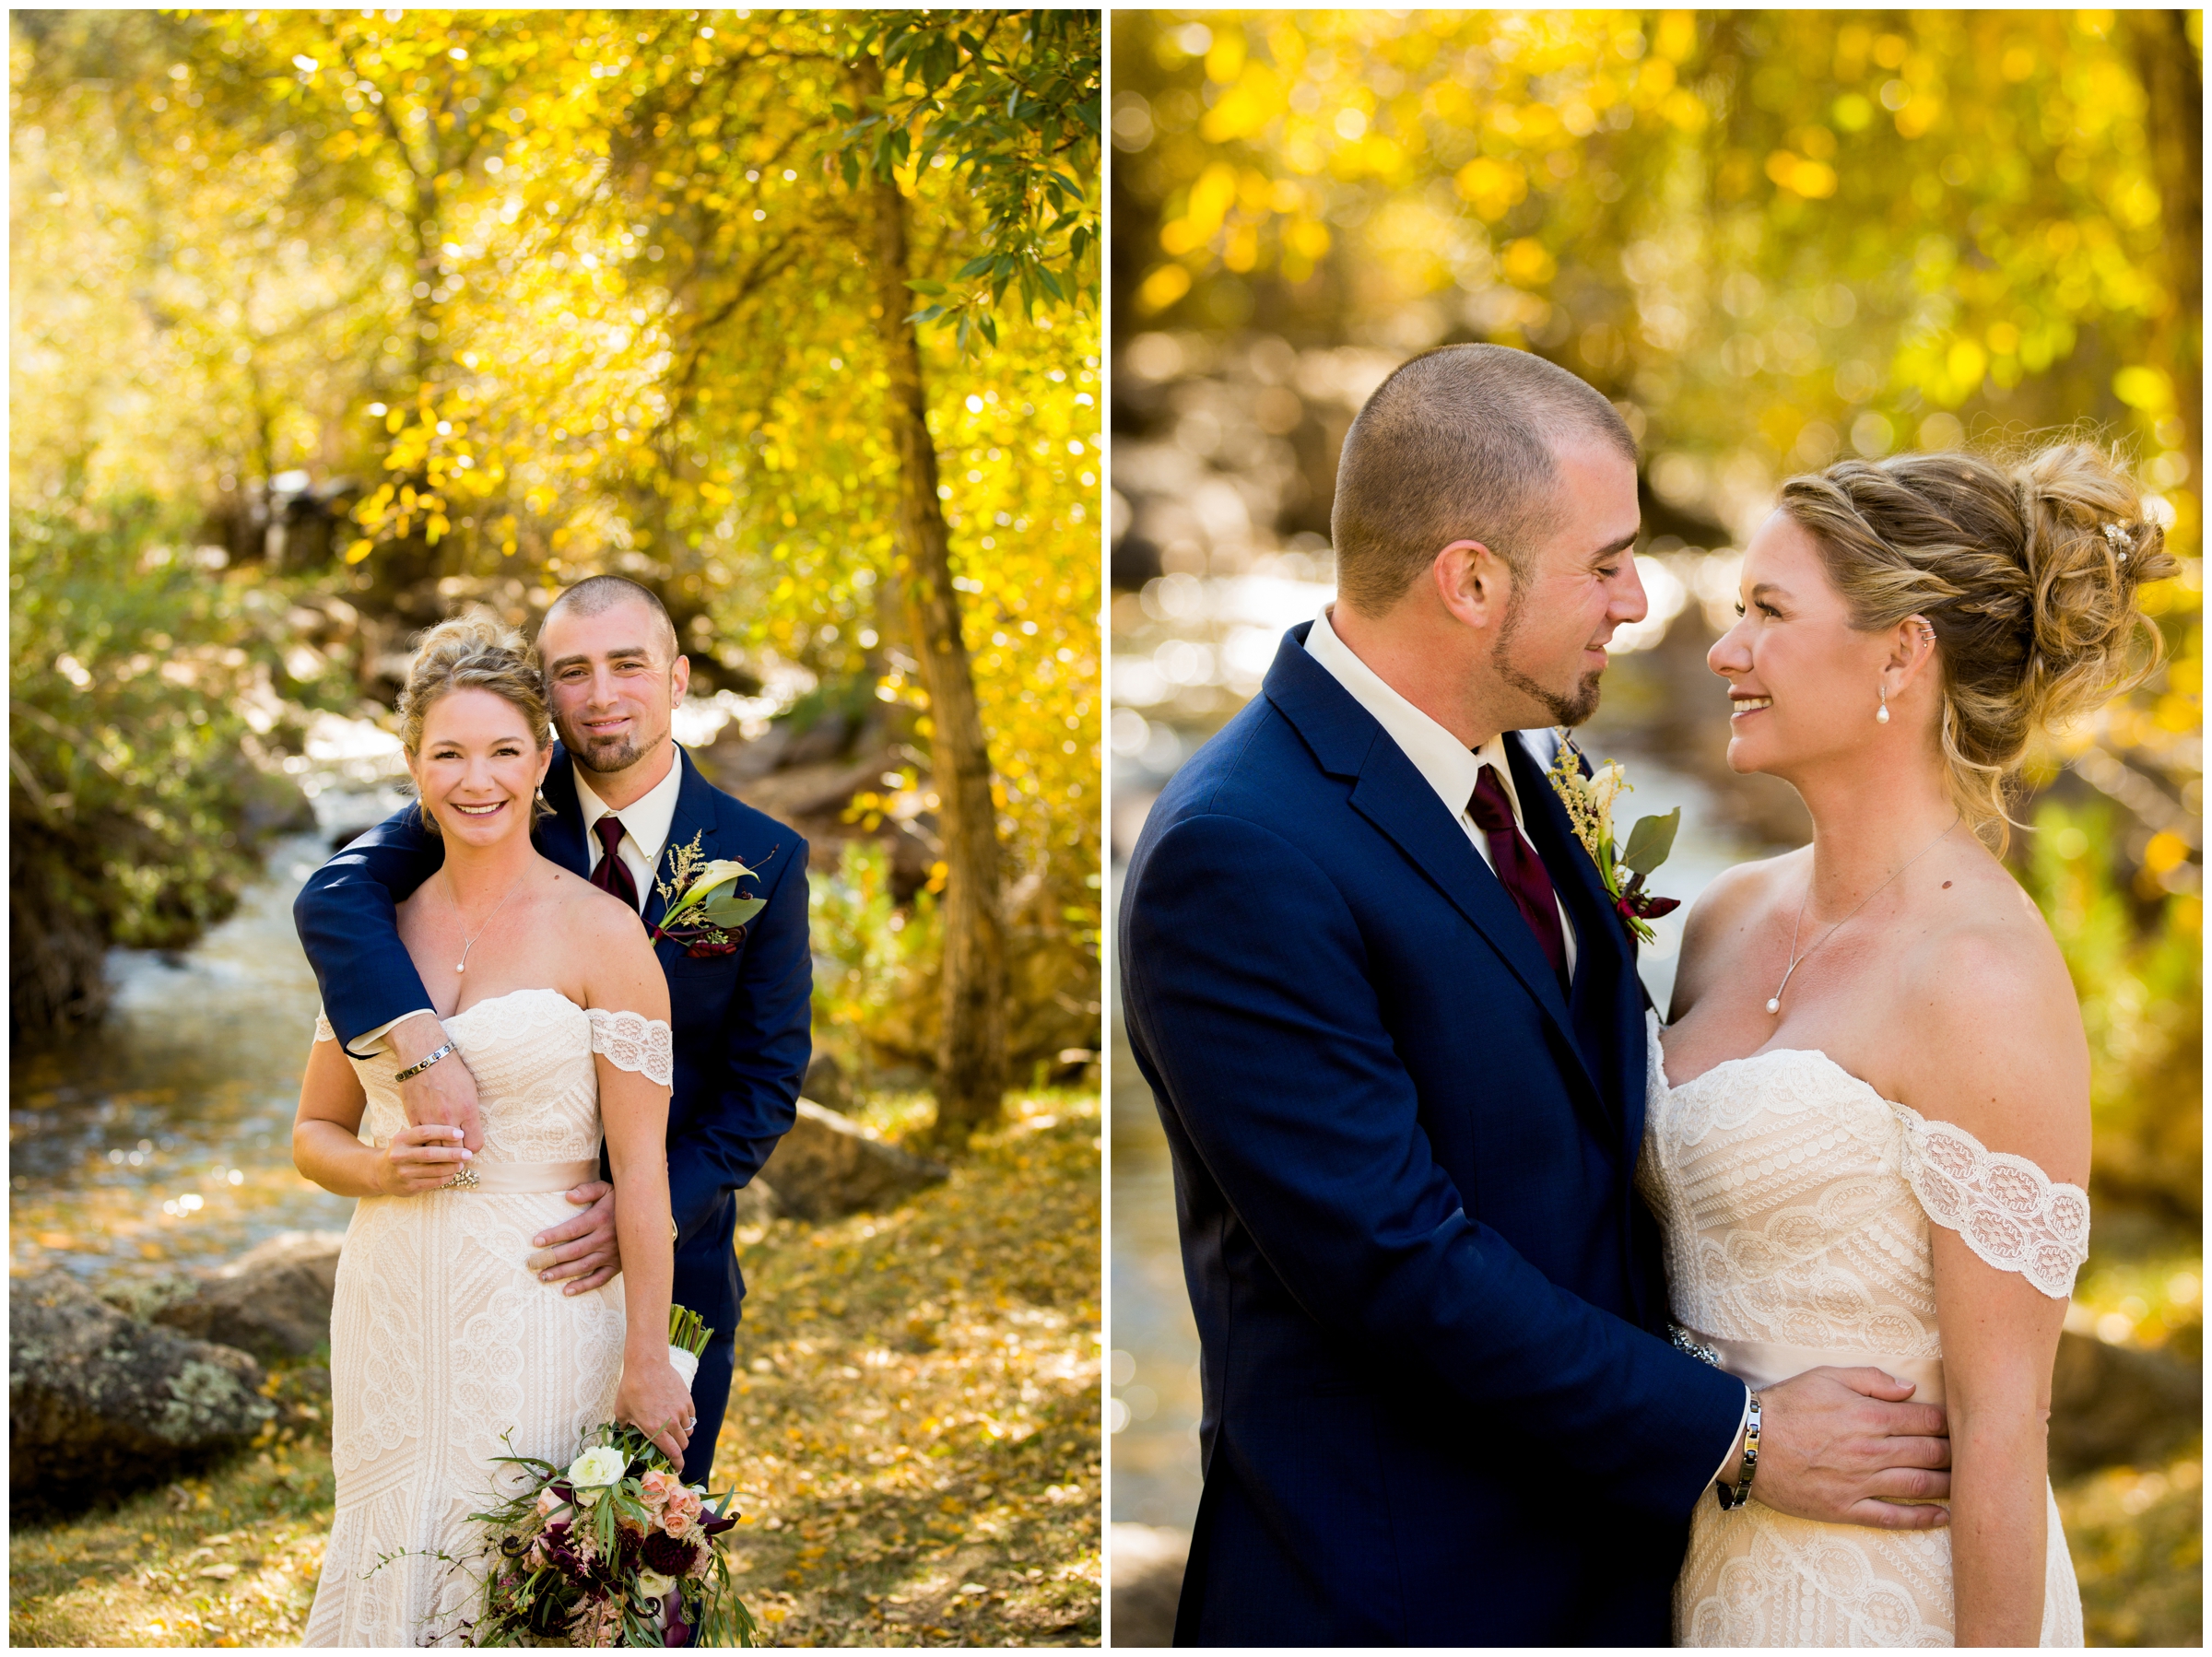 bride and groom embracing amongst fall foliage at Estes Park Skyview Fall River wedding